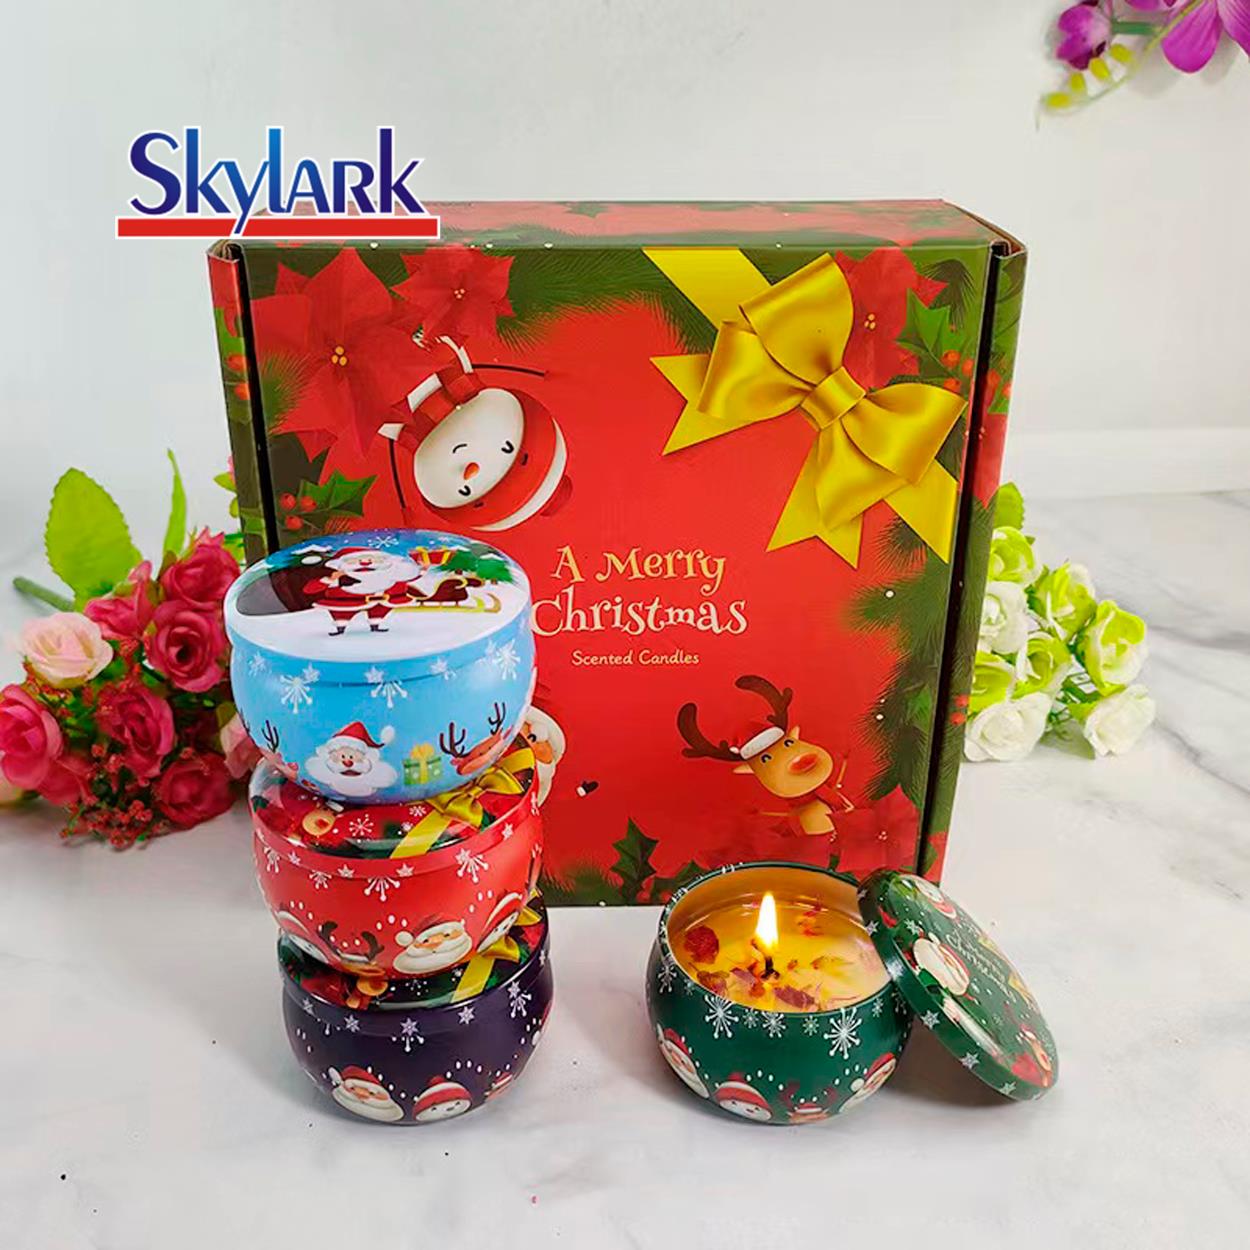 Professional Christmas Scented Candles Gift Set With Excellent Performance Featured Image